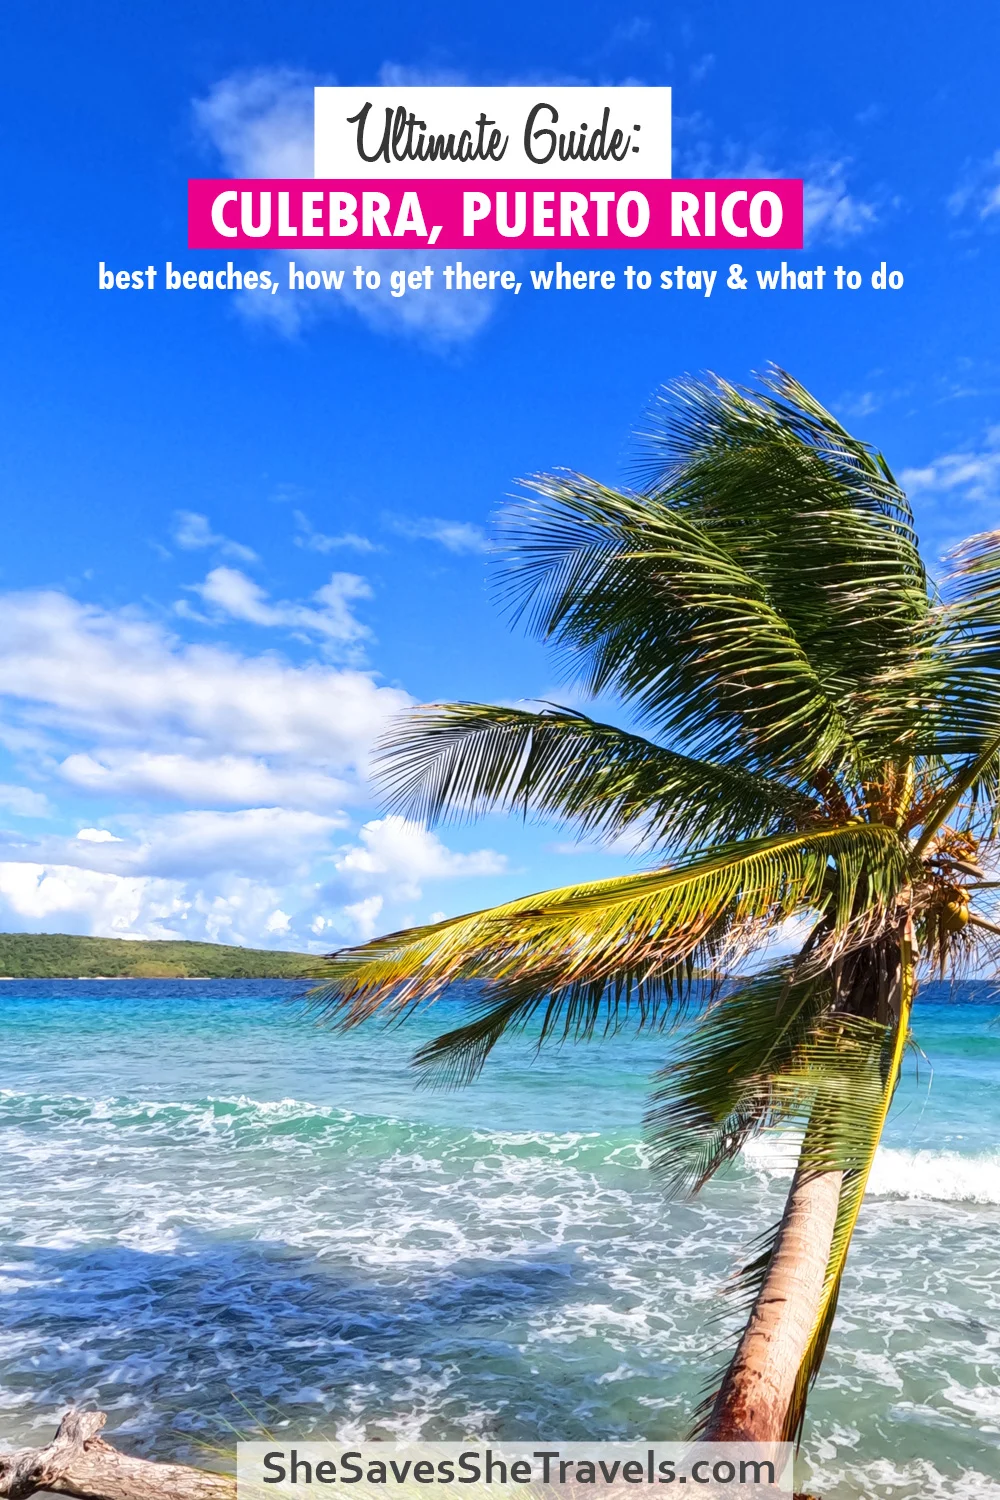 ultimate guide culebra Puerto Rico best beaches how to get there where to stay and what to do with palm tree and turquoise water